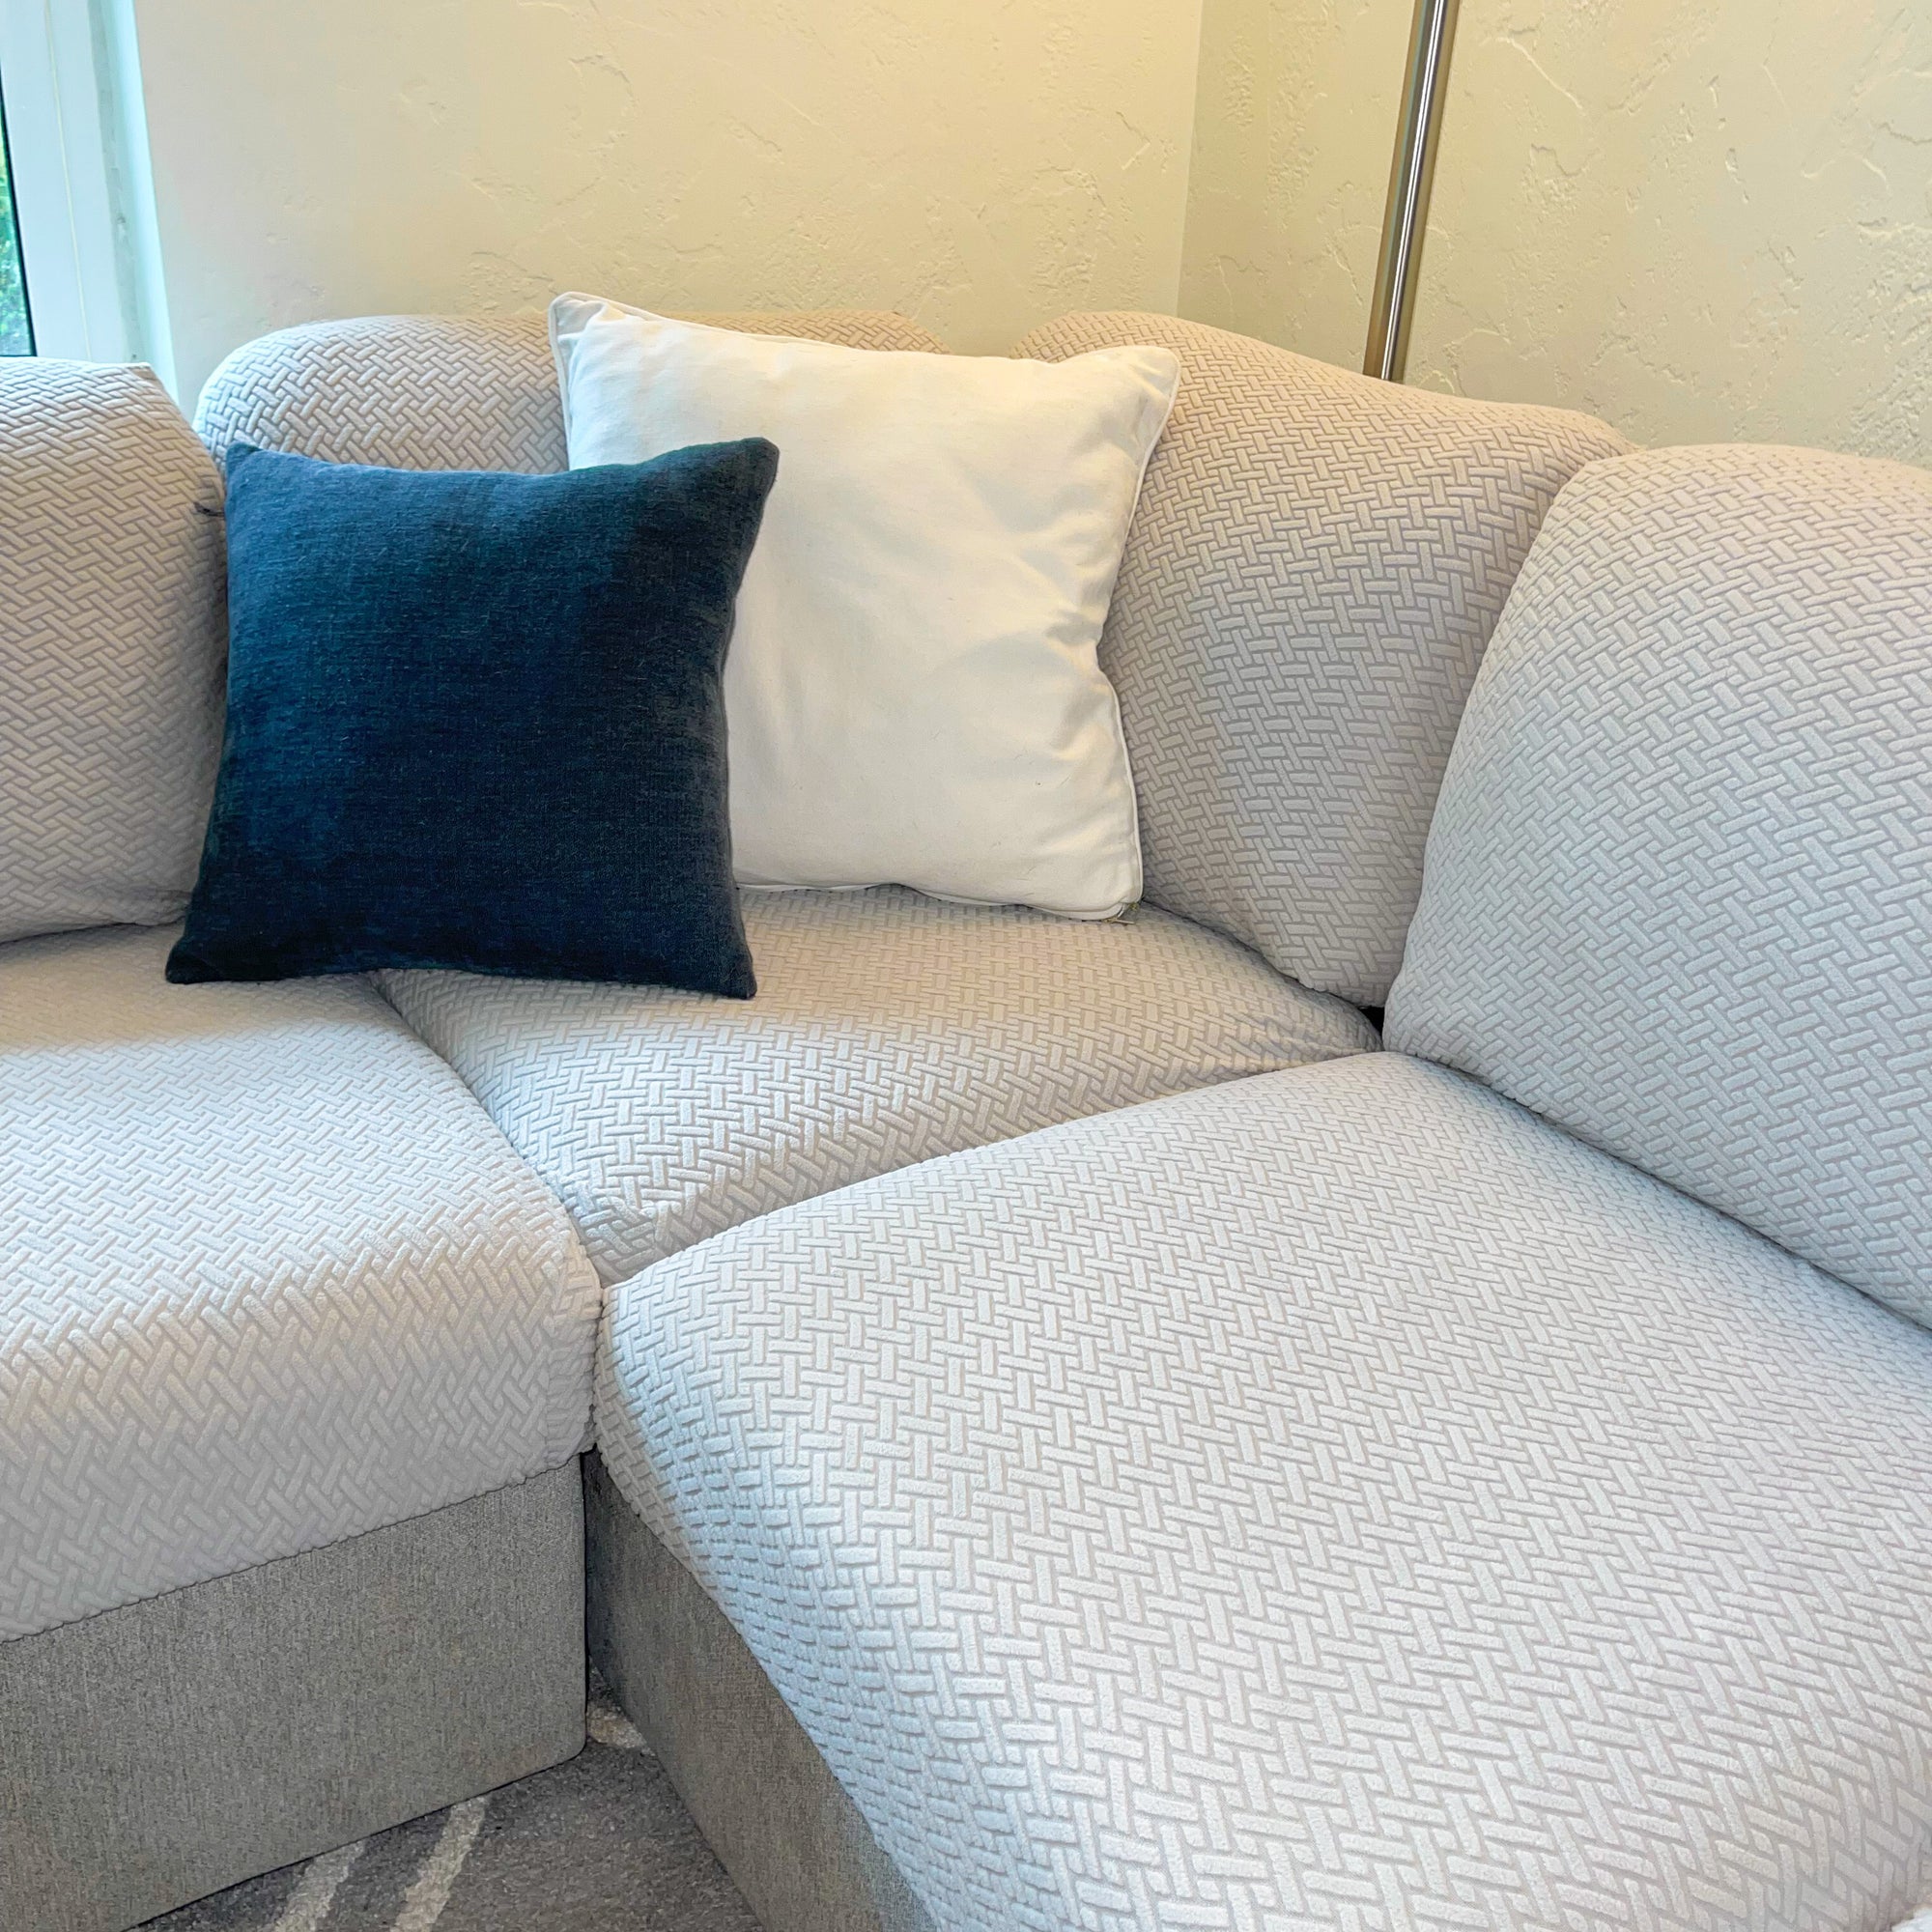 6 Creative Ways to Safeguard Your Sofa with Stylish Covers